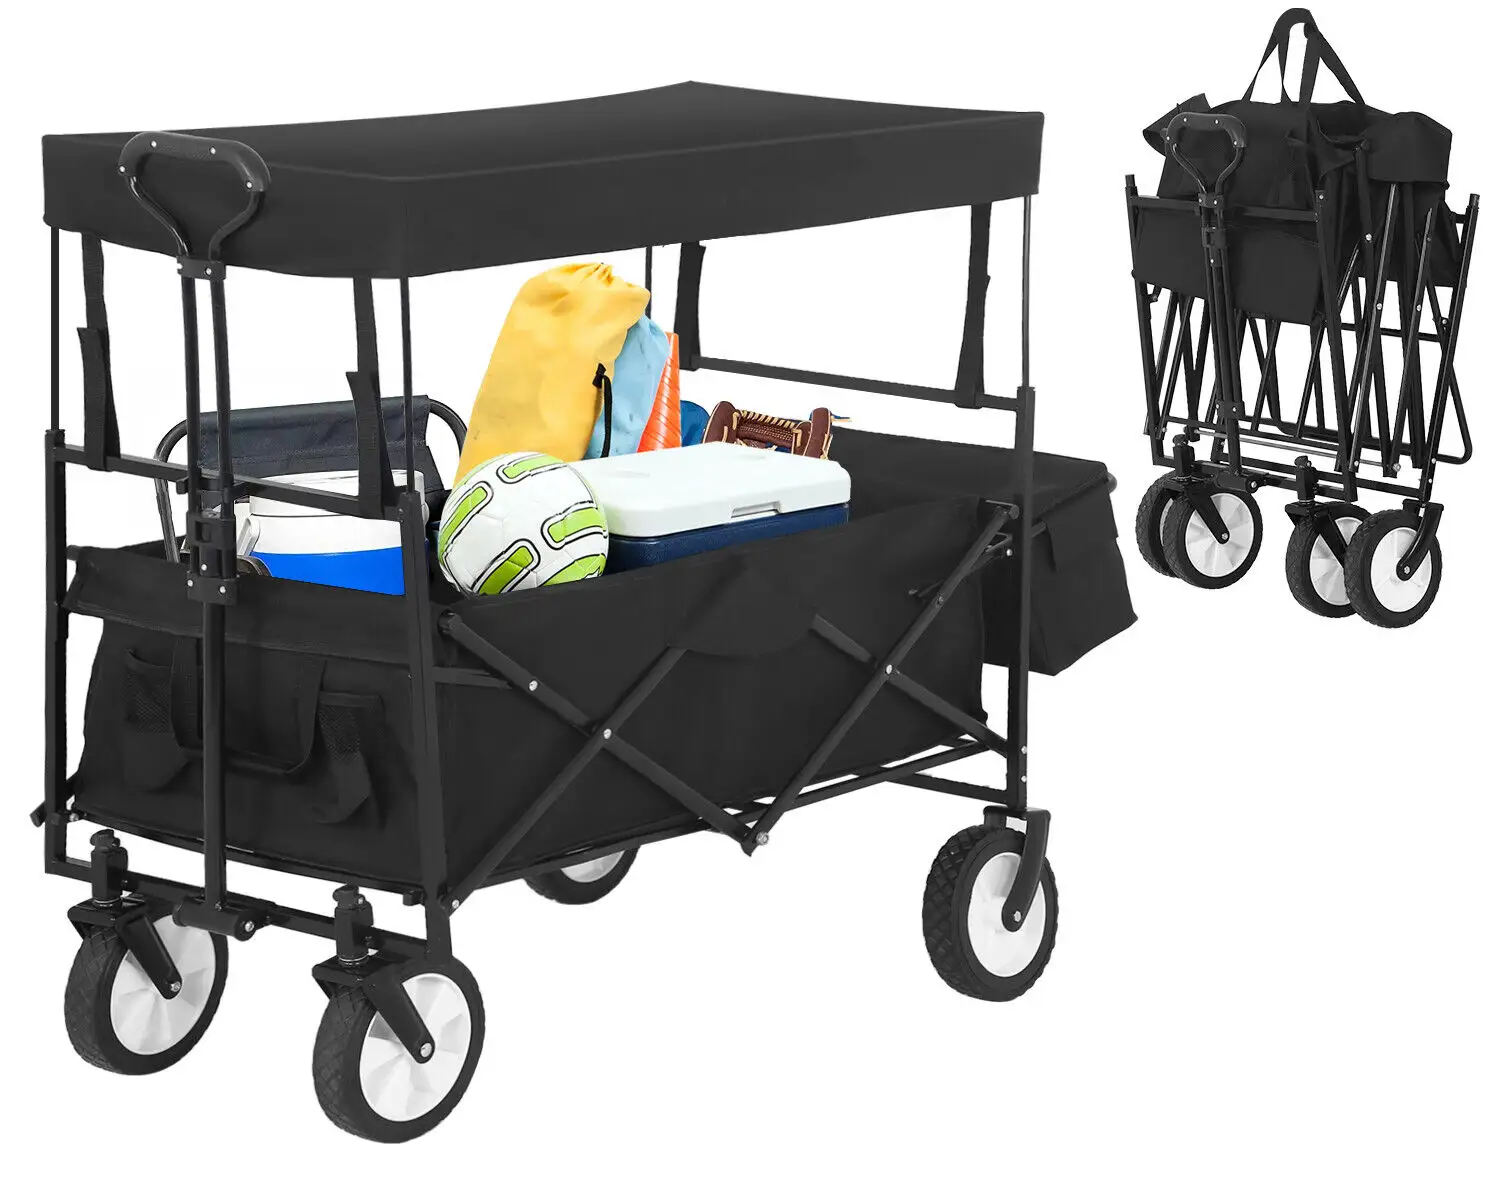 Heavy Duty Folding Wheeled Wagon Cart Collapsible Utility Kids Wagon Cart With Canopy